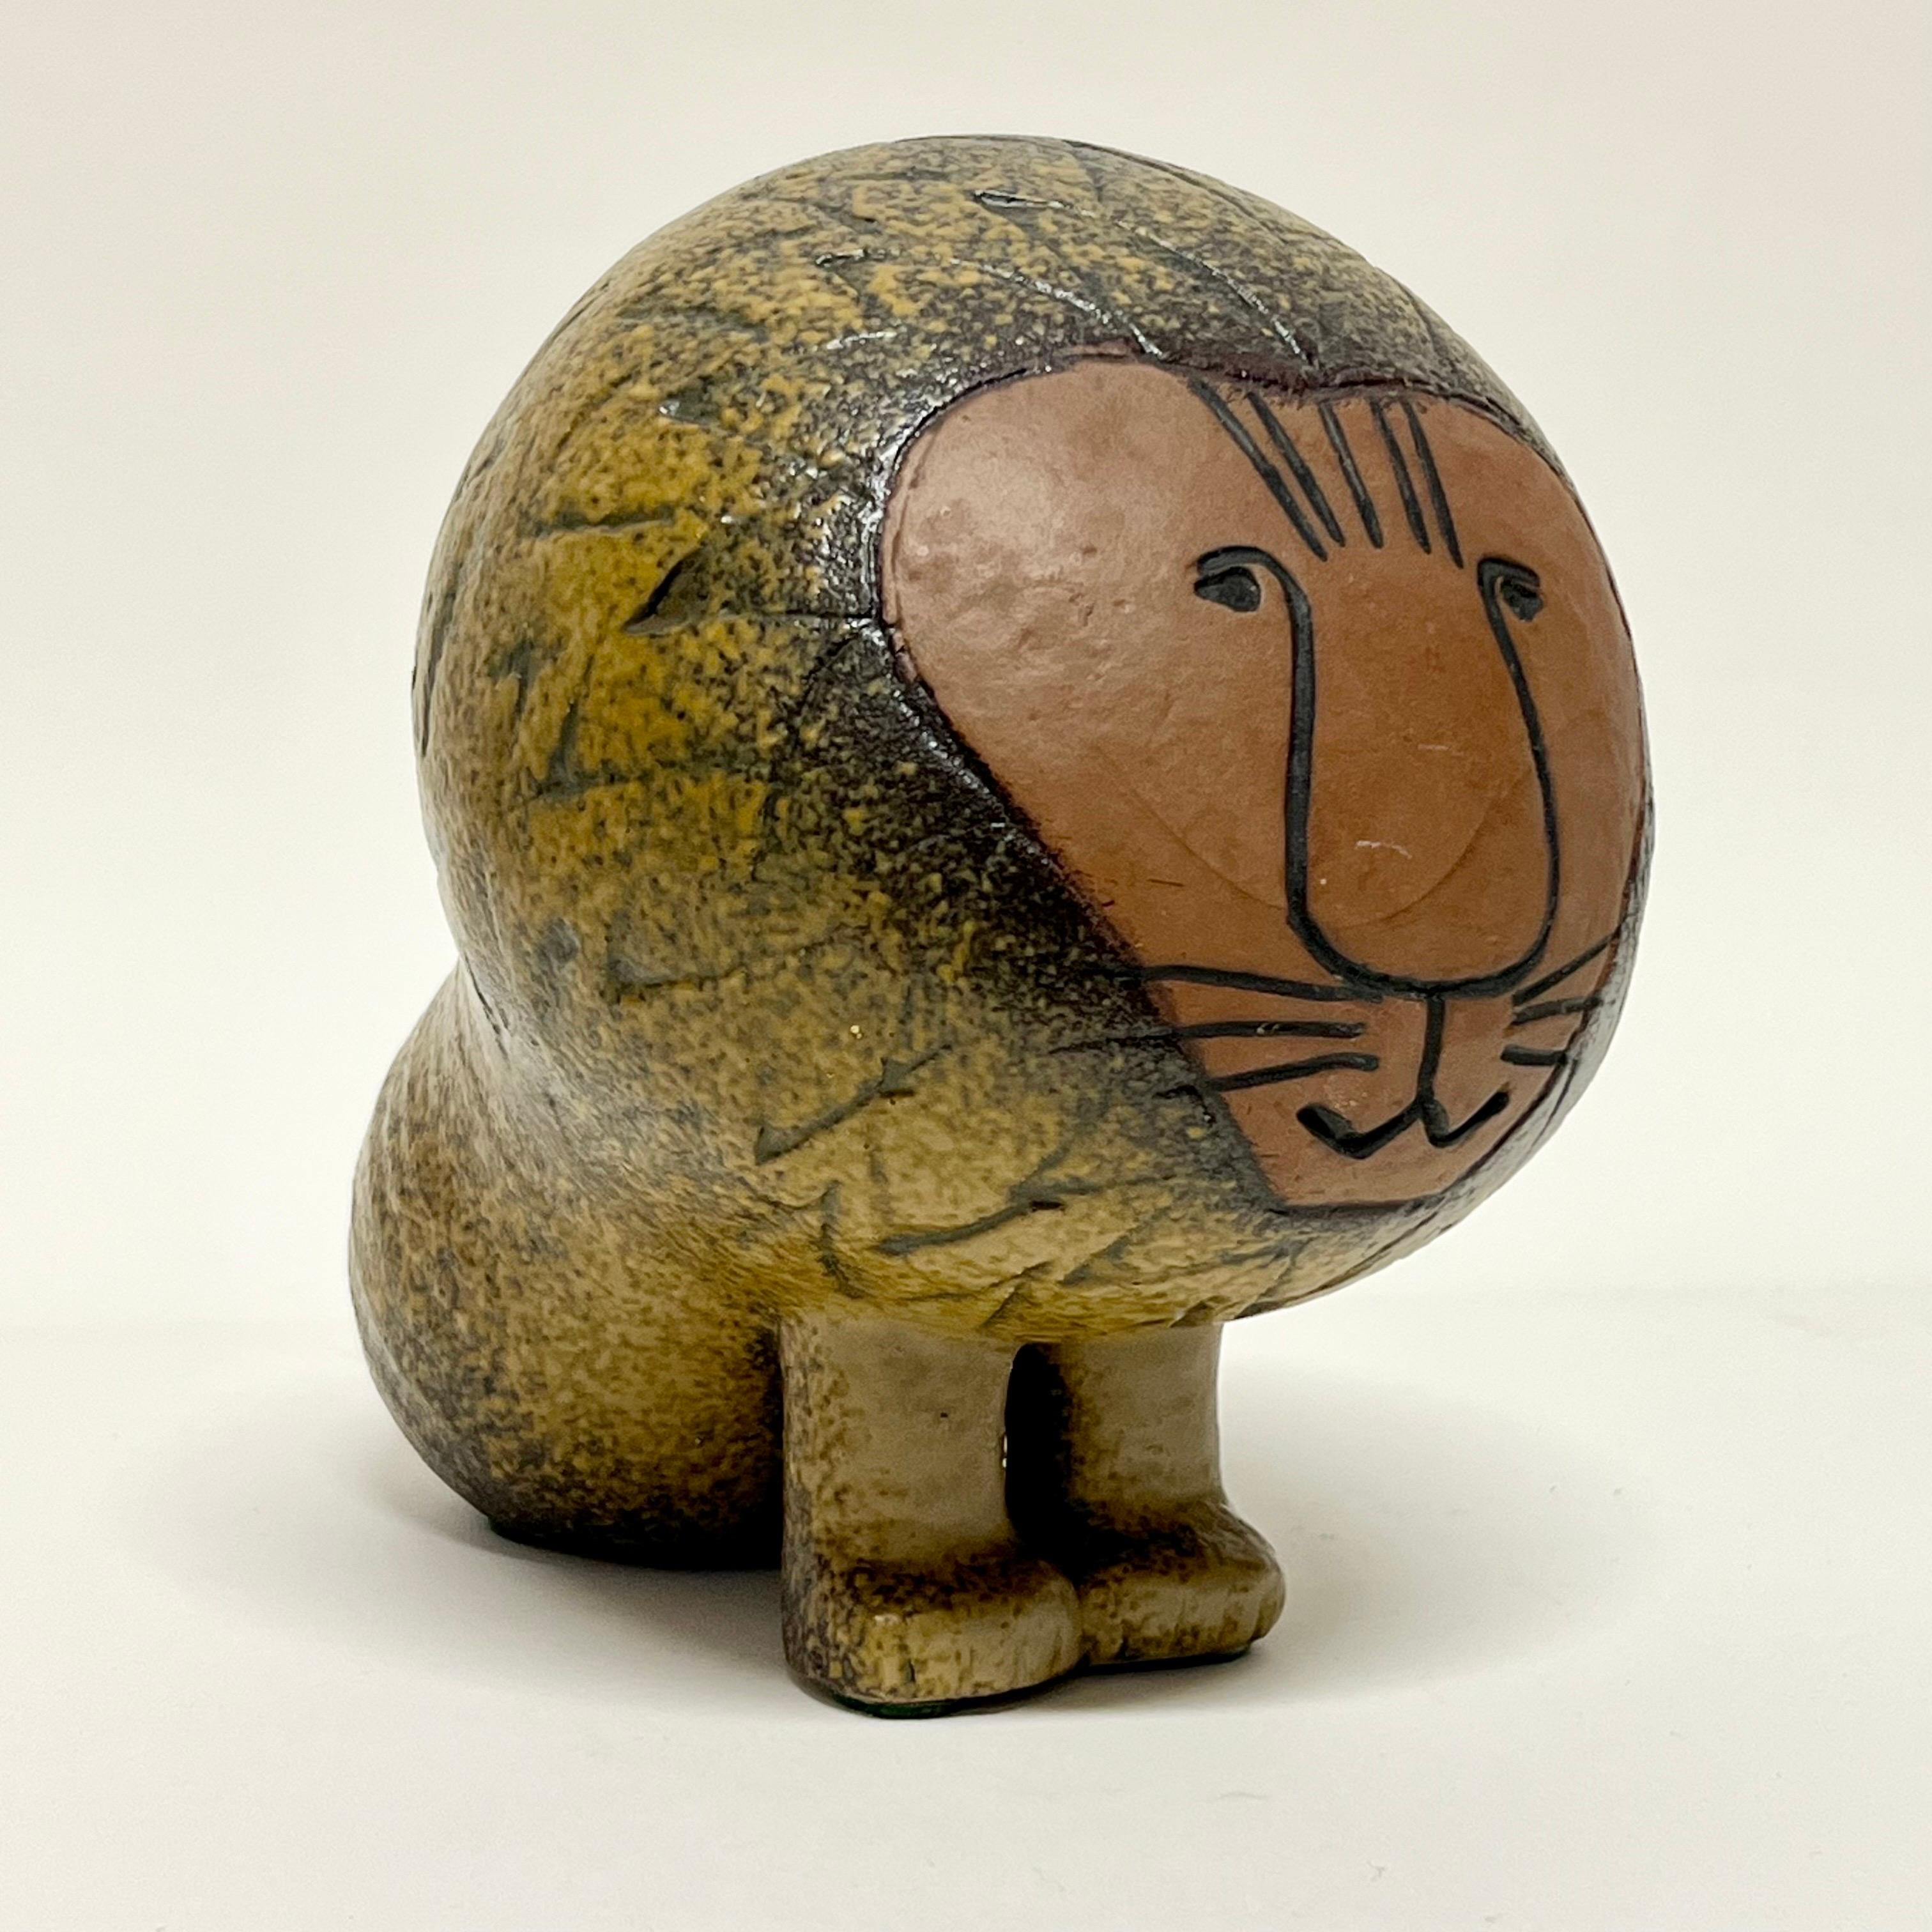 Lovely and whimsical ceramic lion by famous Scandinavian artist, Lisa Larson for Gustavsberg c1950s. These were made in 3 sizes, this is the medium size. Excellent condition with no issues. 